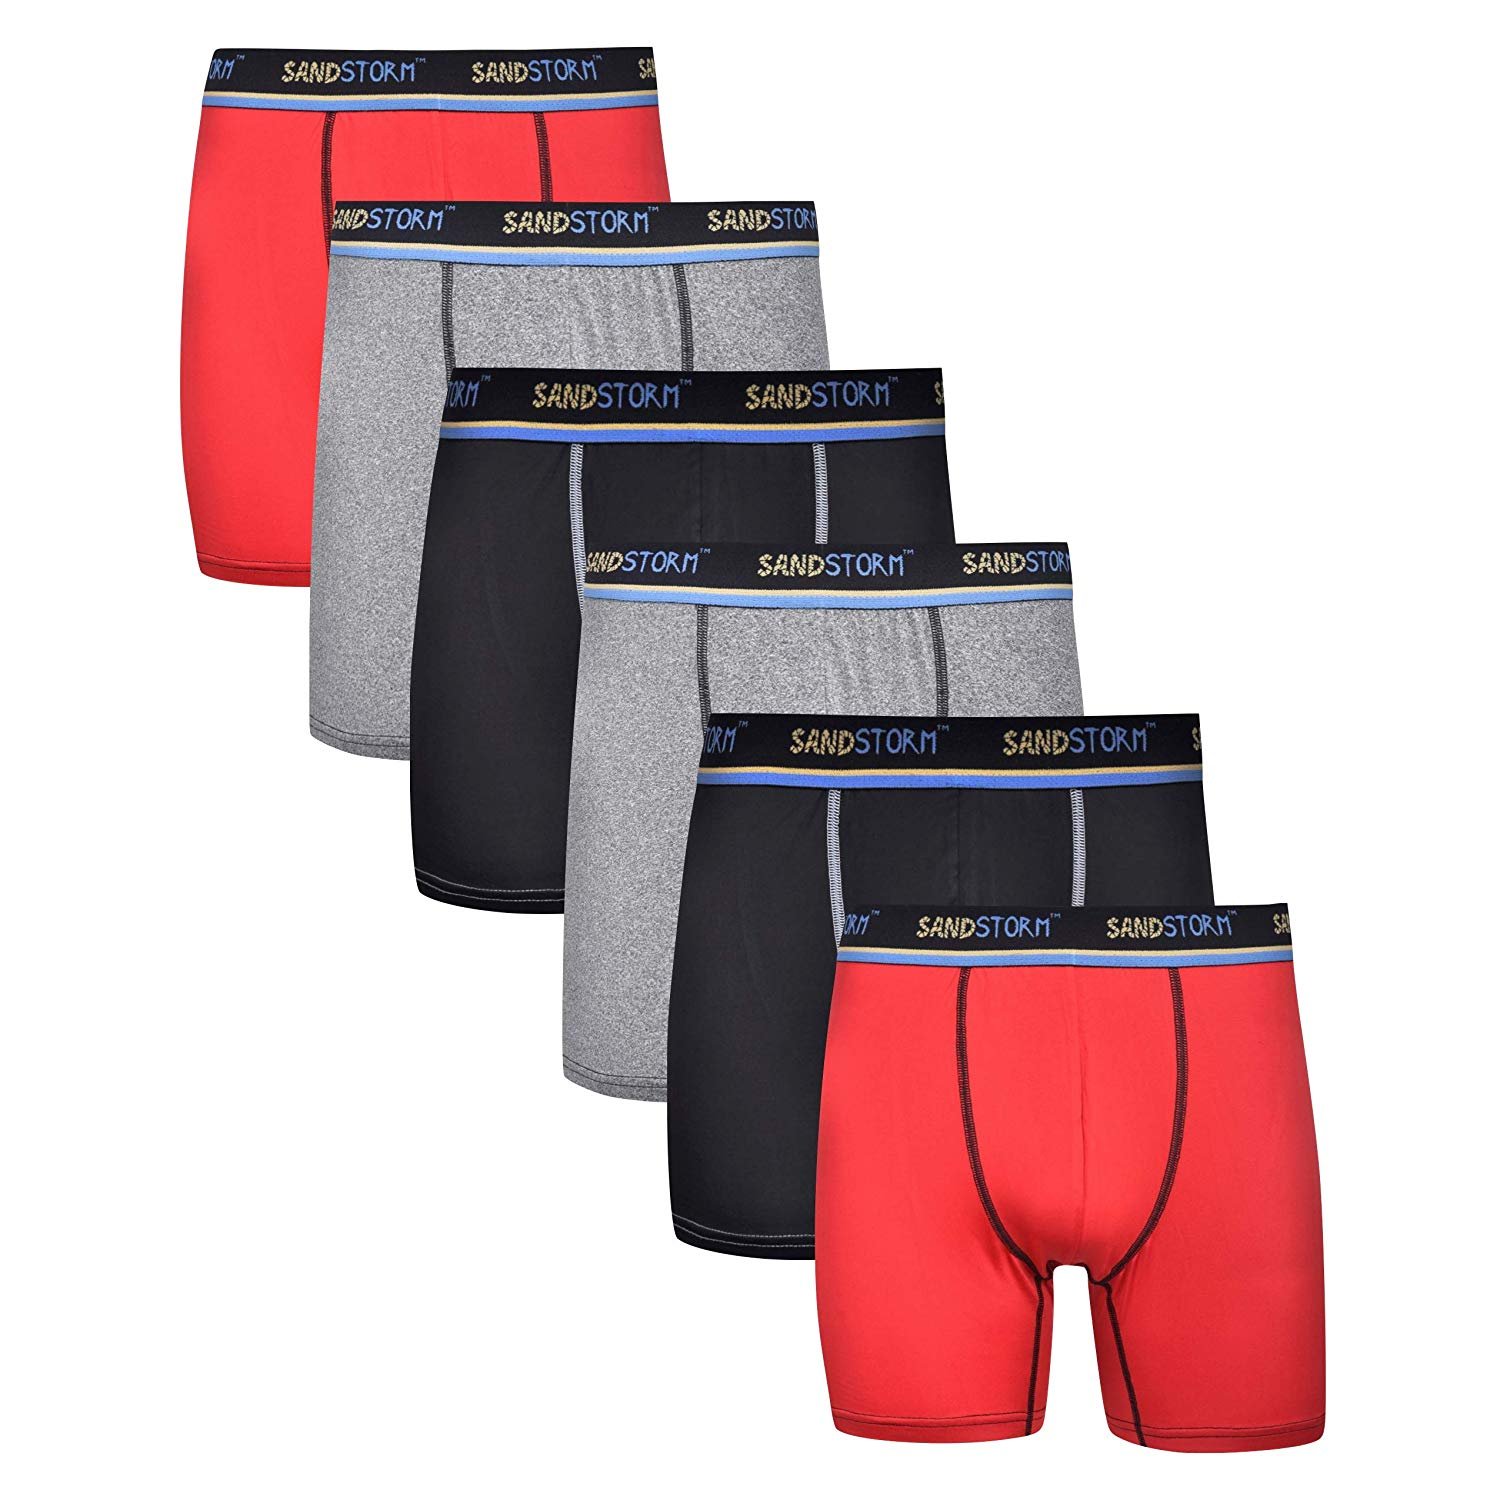 Sand Storm Mens Performance Boxer Briefs - 6-Pack No-Fly Tagless